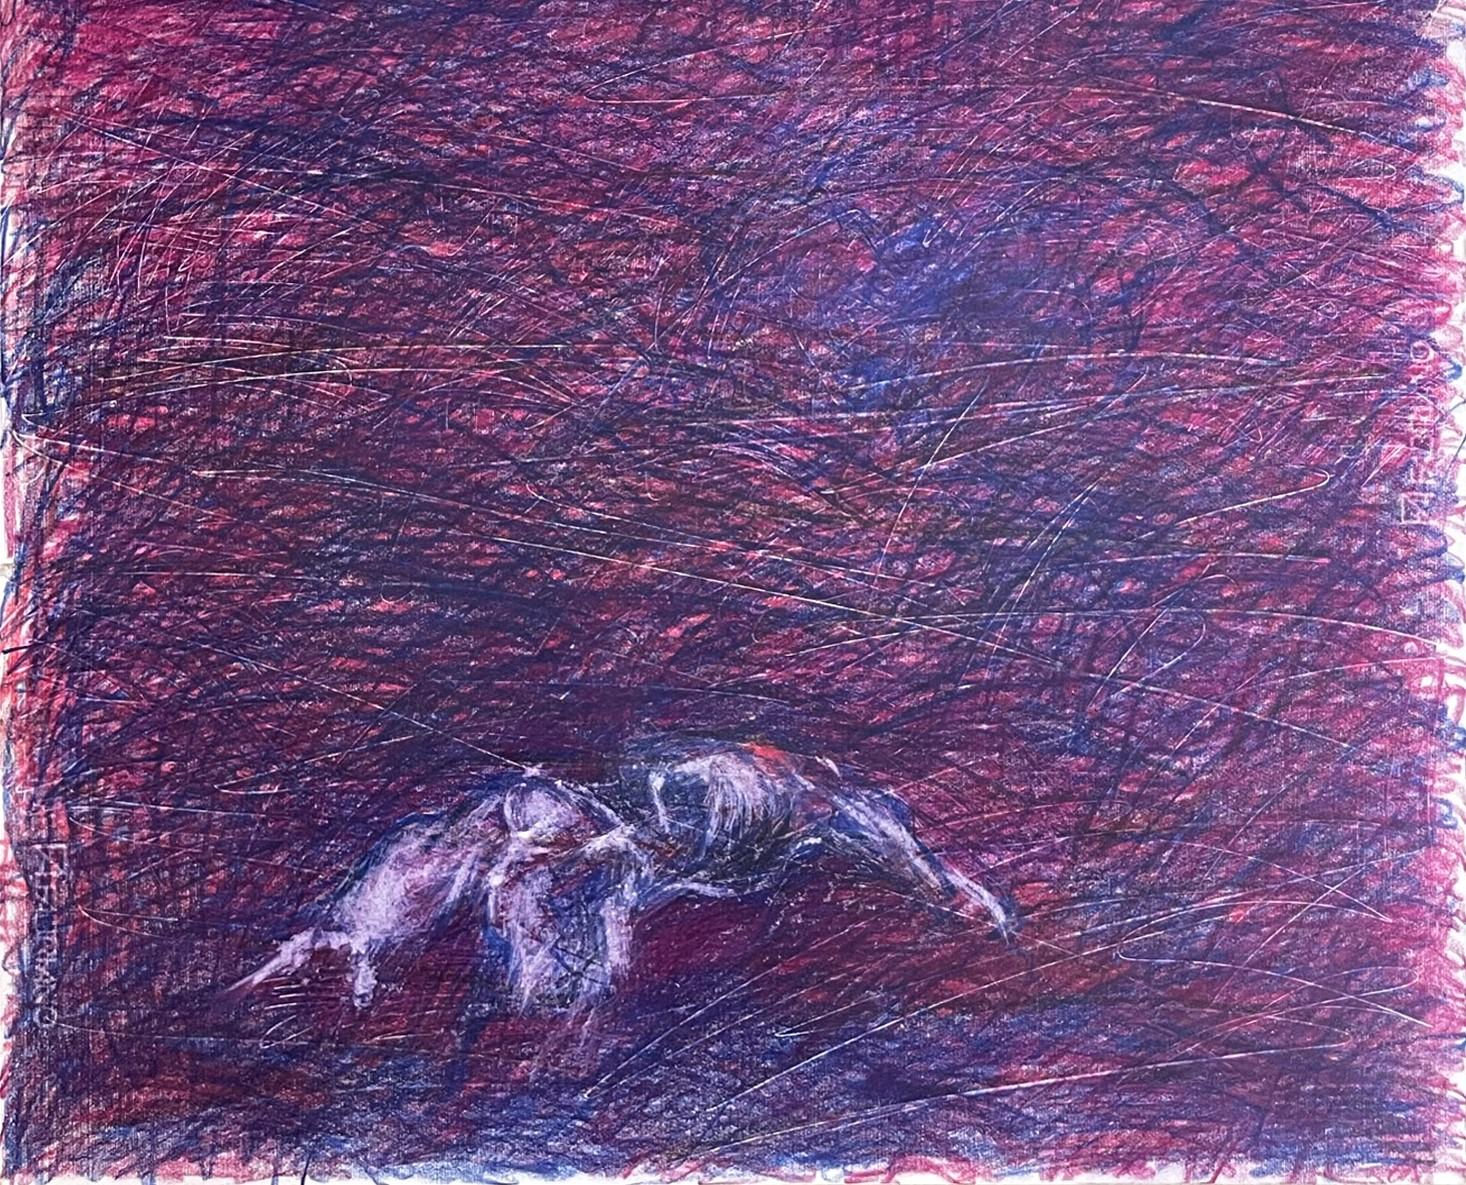 Untitled 05, 2022
coloured pencils on paper
39 3/8 H x 27 9/16 W inches
100 H x 70 W cm
Signed on reverse

Zsolt Berszán embodies in his works the dissolution of the human body through the prism of the fragment, the body in pieces, and the skeletal